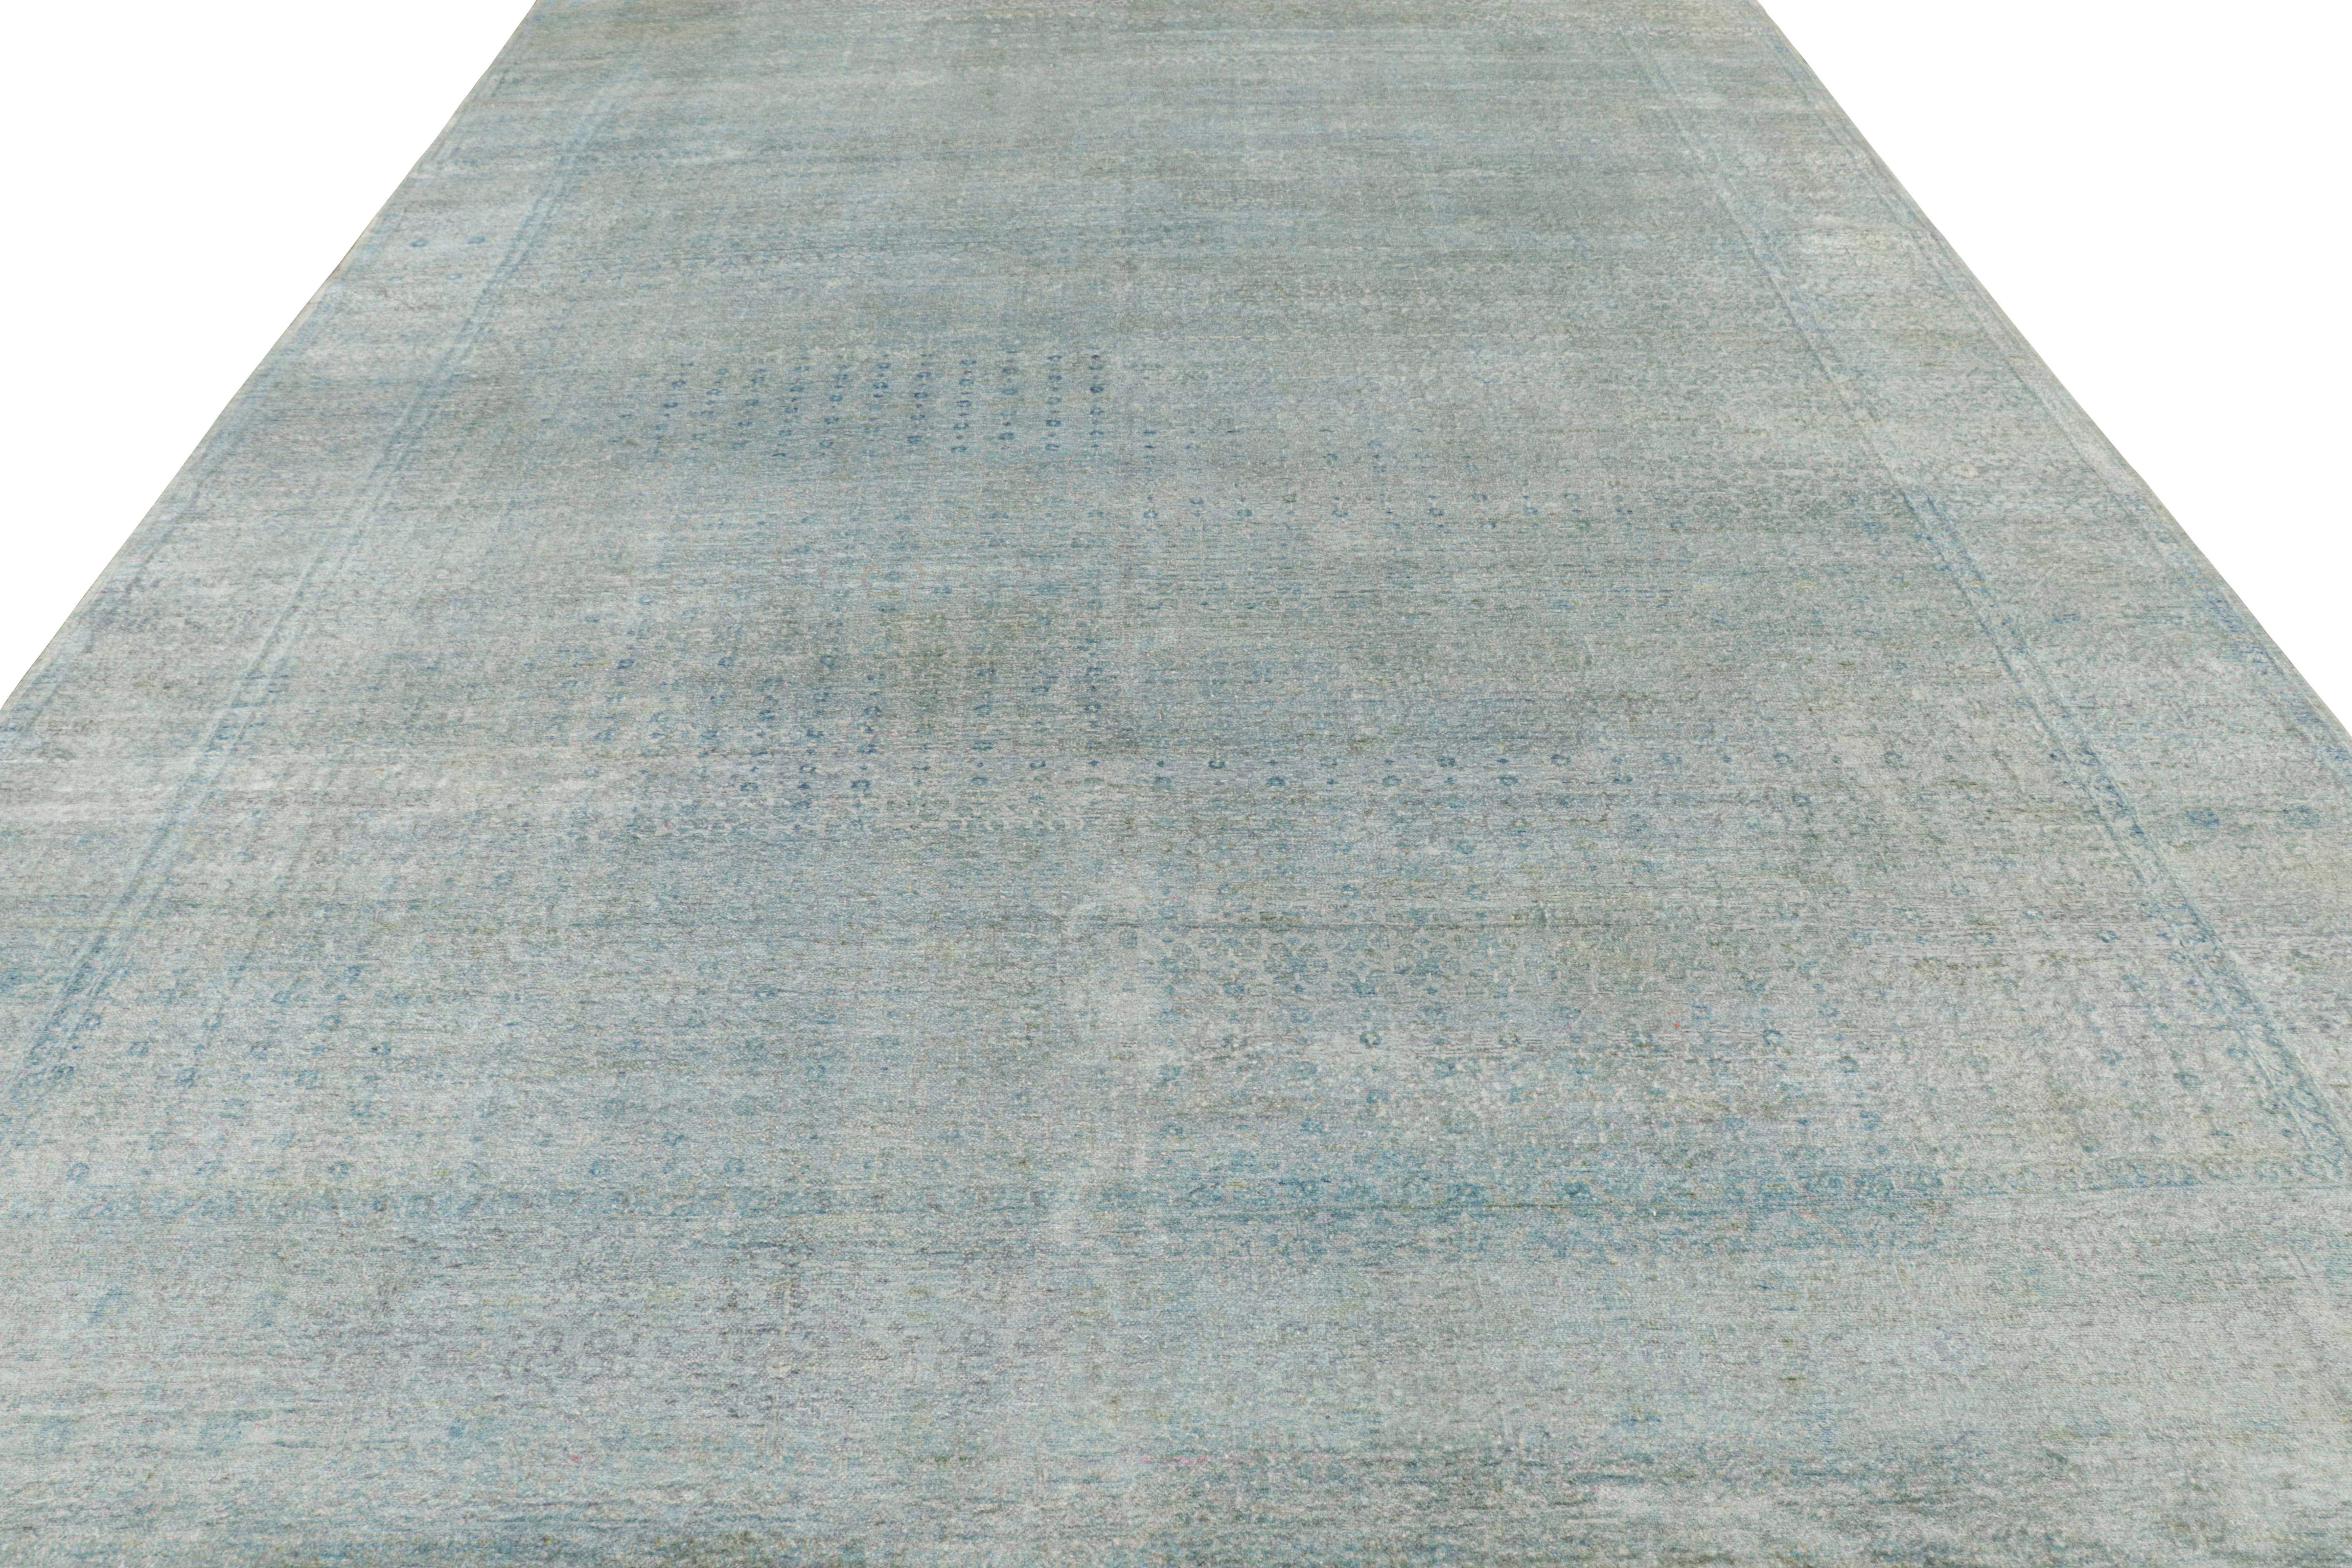 Indian Rug & Kilim’s Modern Classic Rug in Blue and Silver/Gray Gentle Patterns For Sale